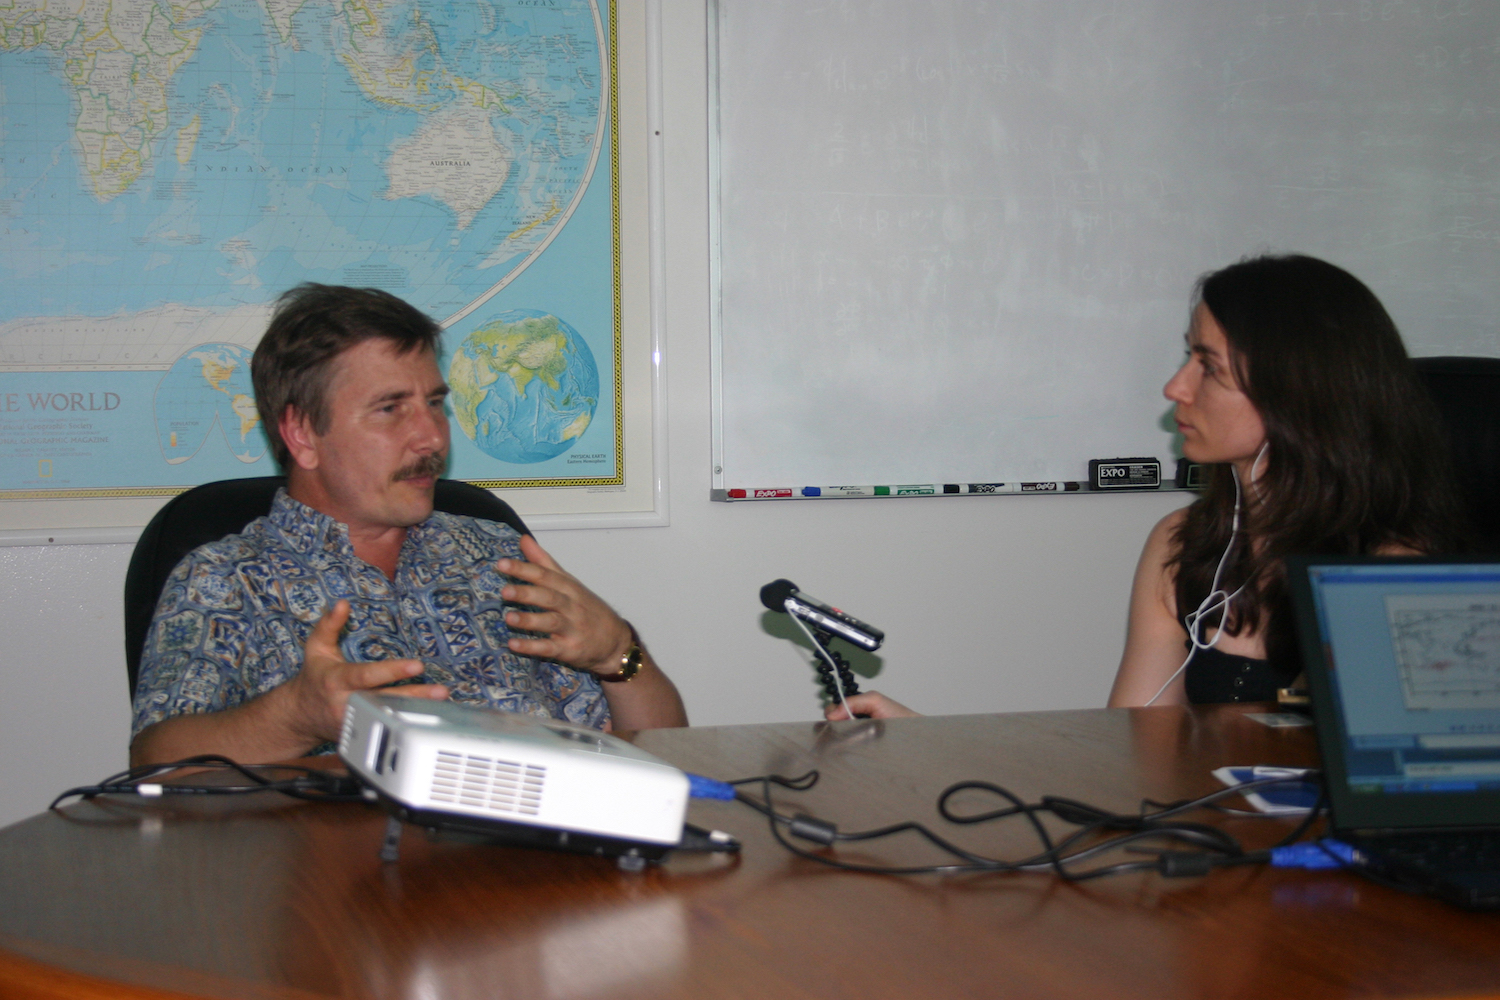 Interviewing Nikolai Maximenko at the International Pacific Research Center on Oahu in 2011. Picture: Gisela Speidel (IPRC)